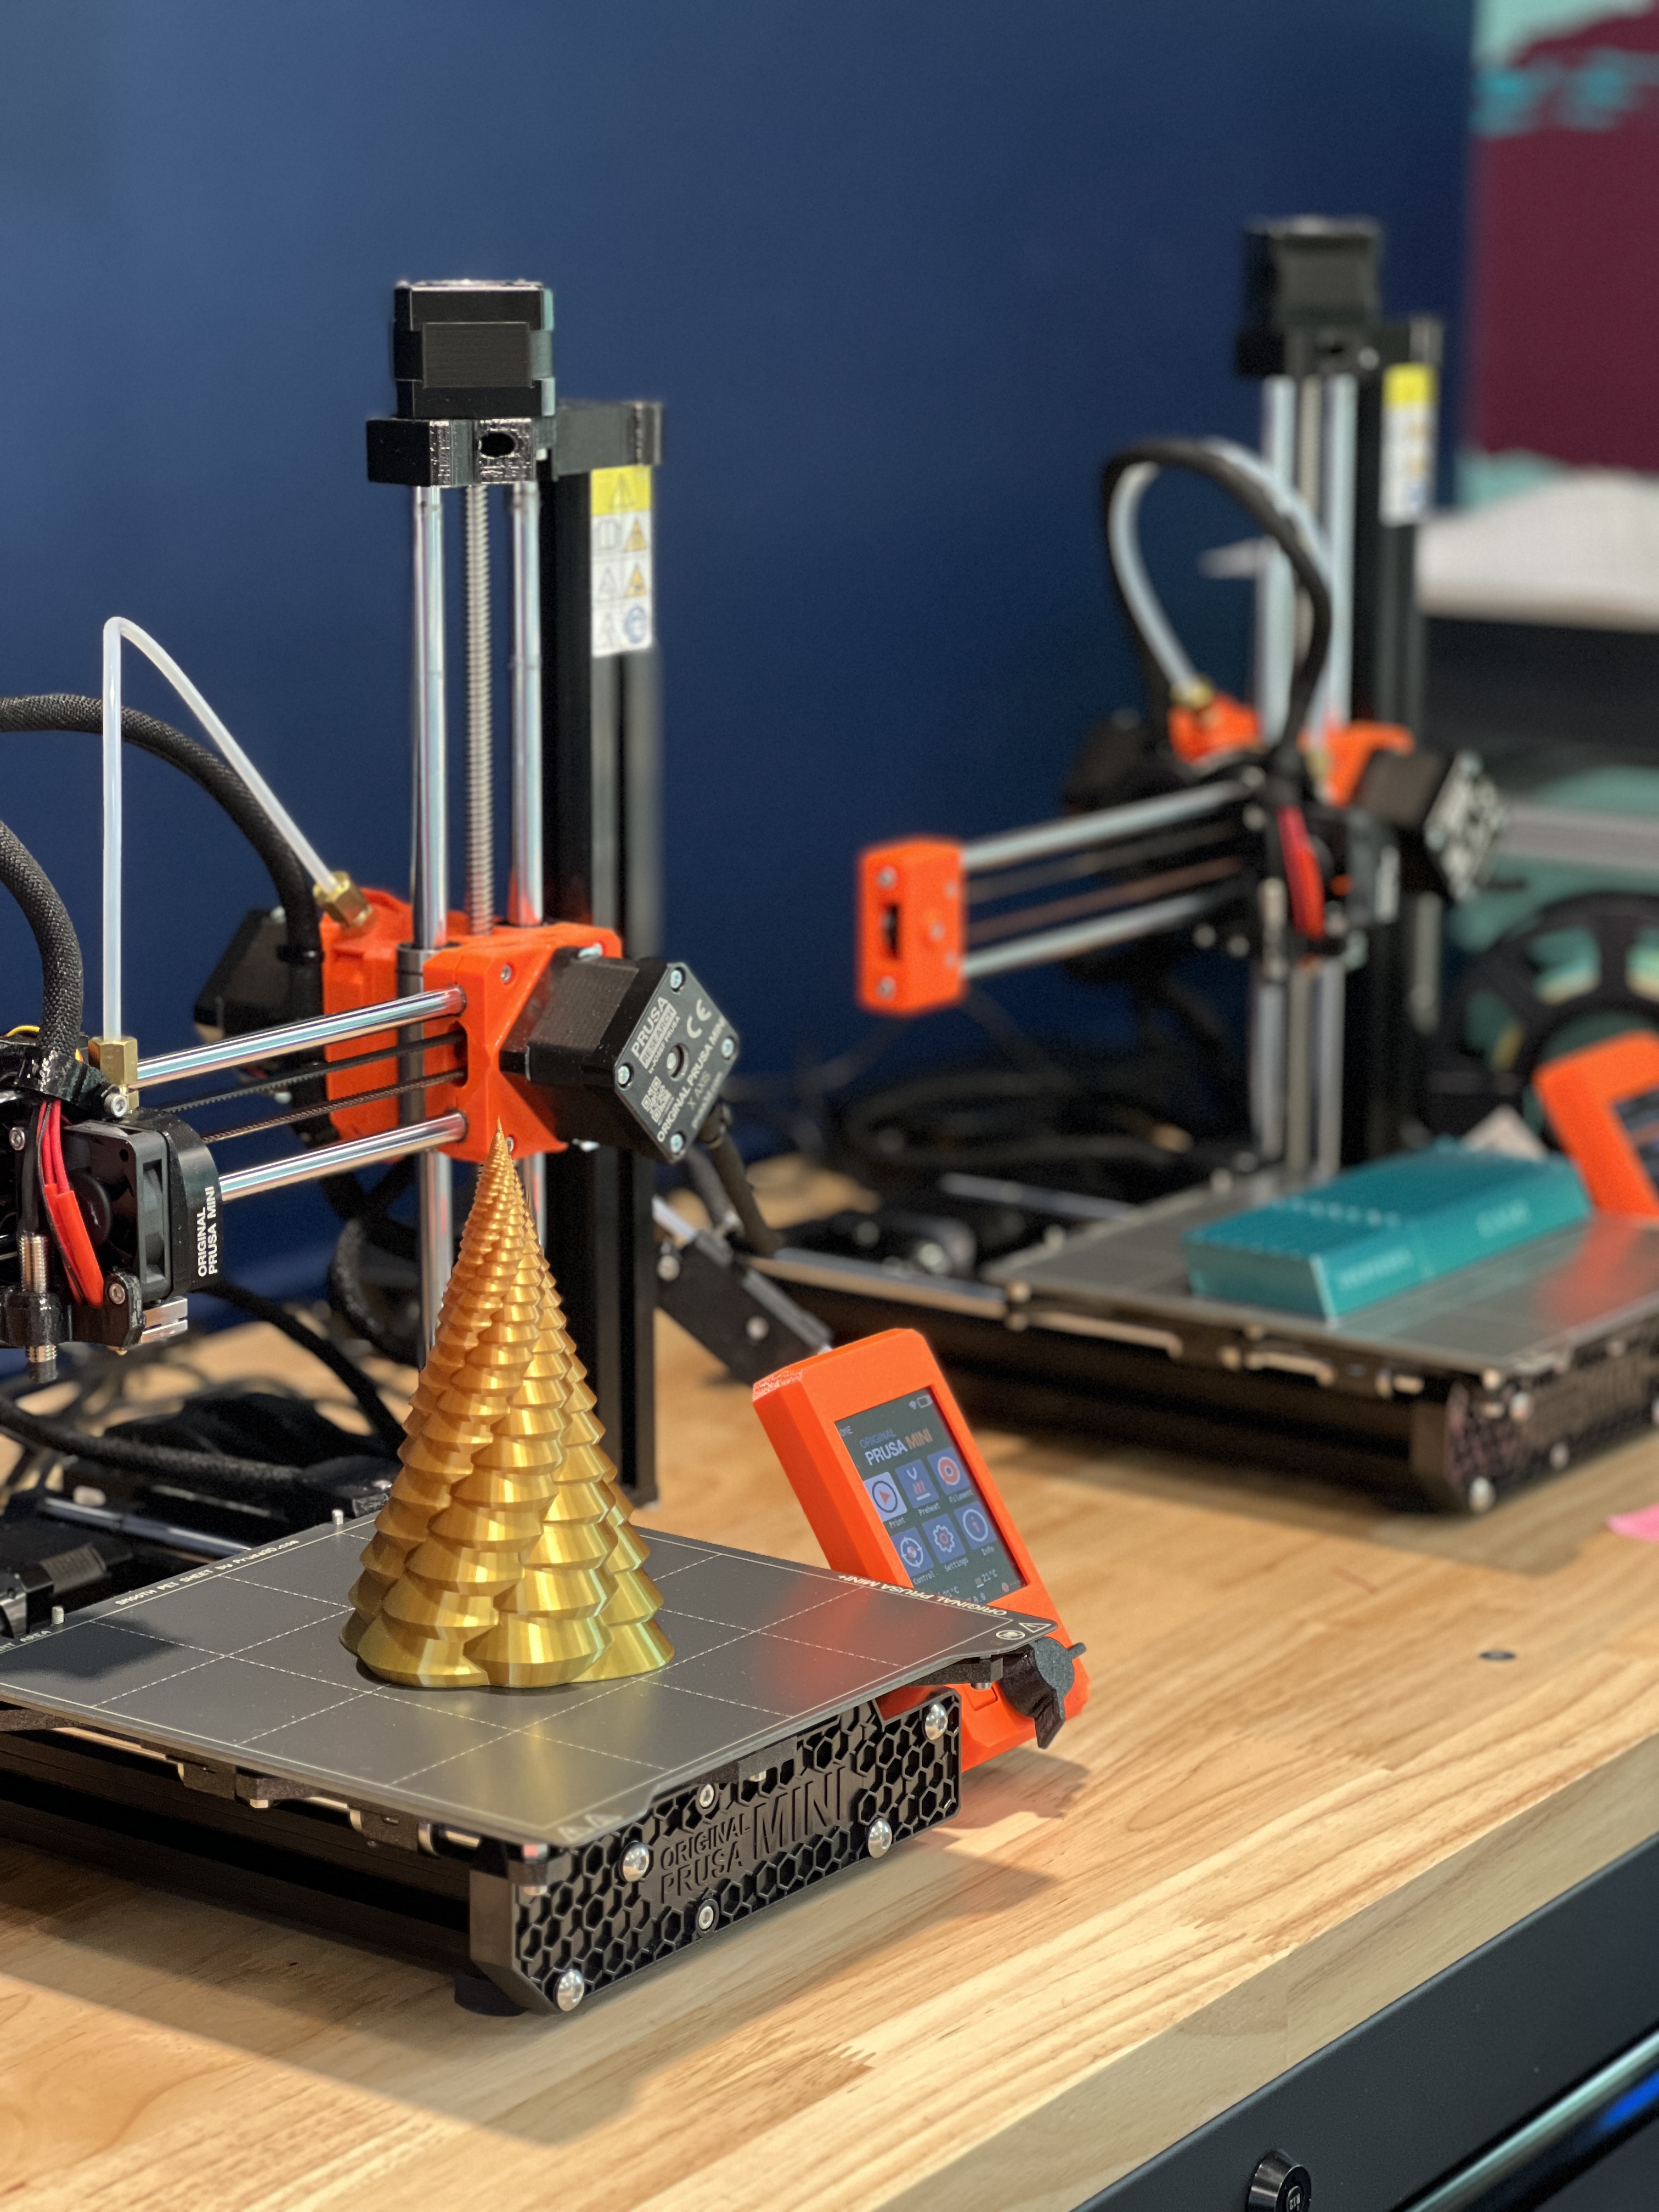 Two Prusa Mini 3D Printers. The first one has a geometric gold colored tree on the build plate.